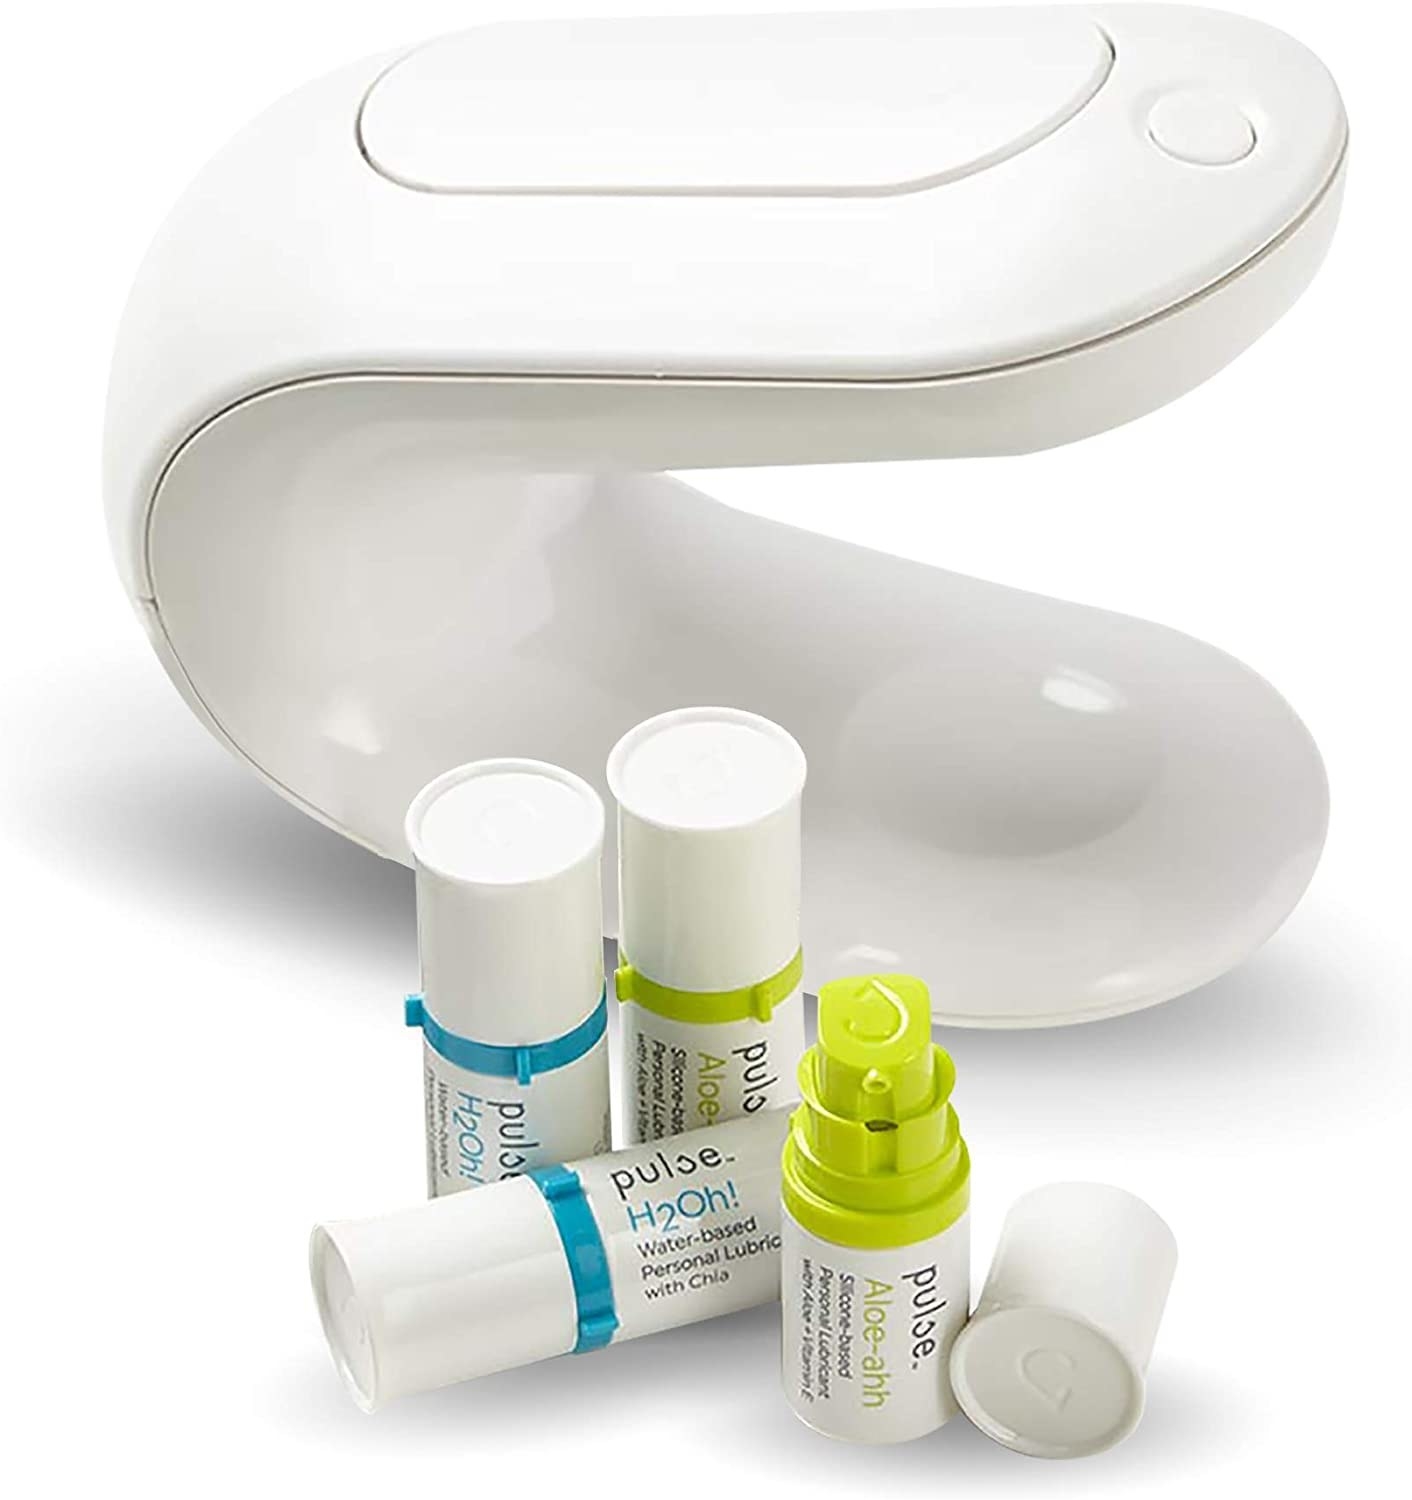 White lubricant warmer and dispenser next to two blue pods and two green pods